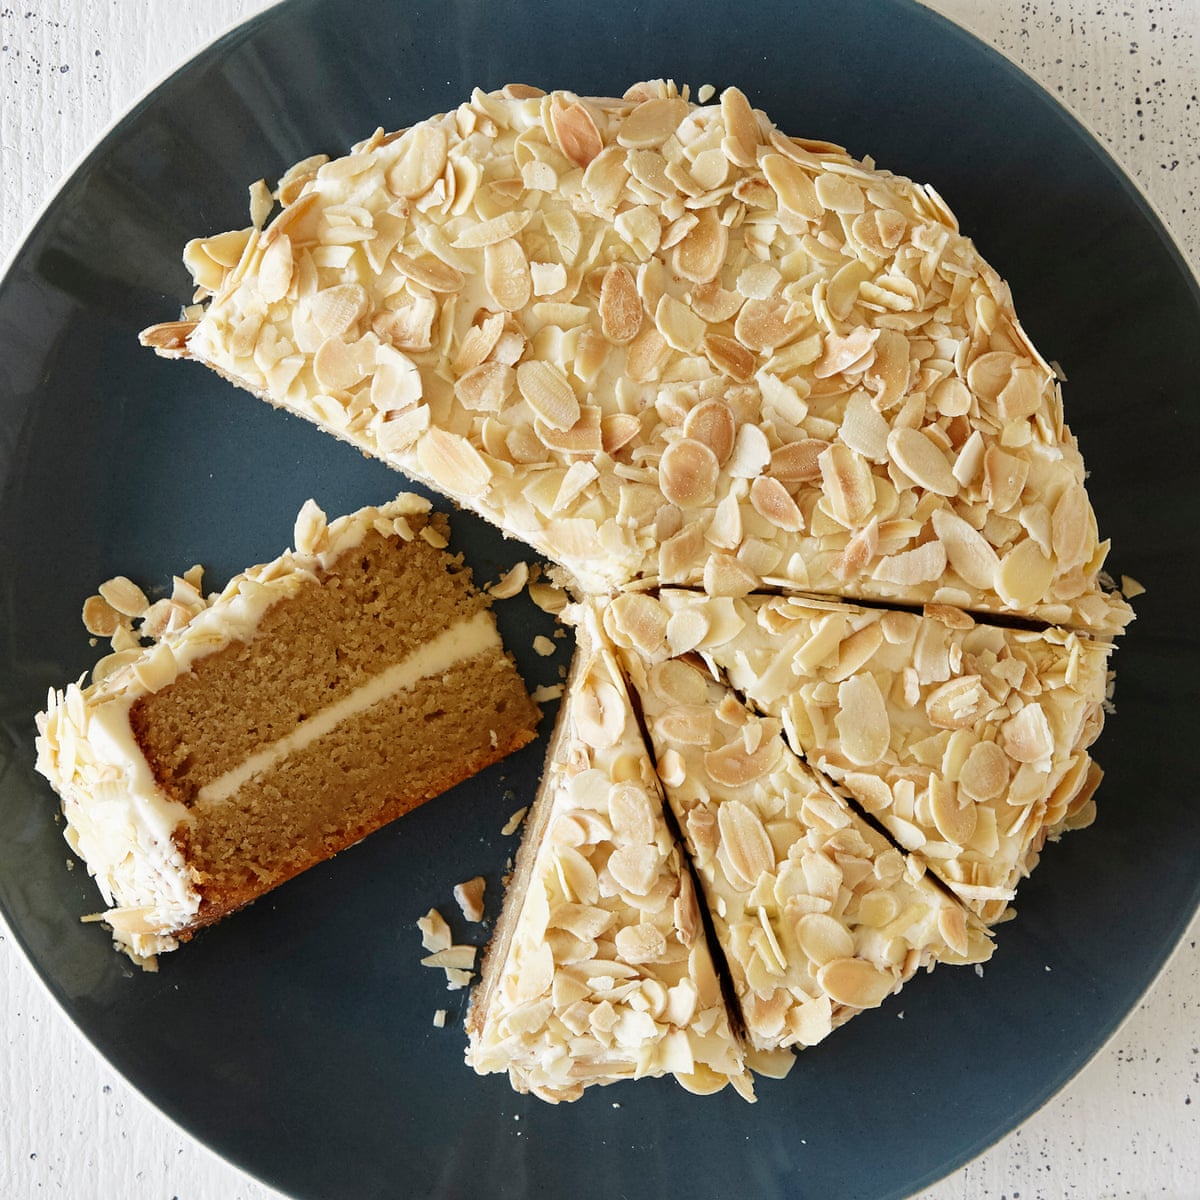 Quick and easy cake recipes by Mary Berry | Food | The Guardian